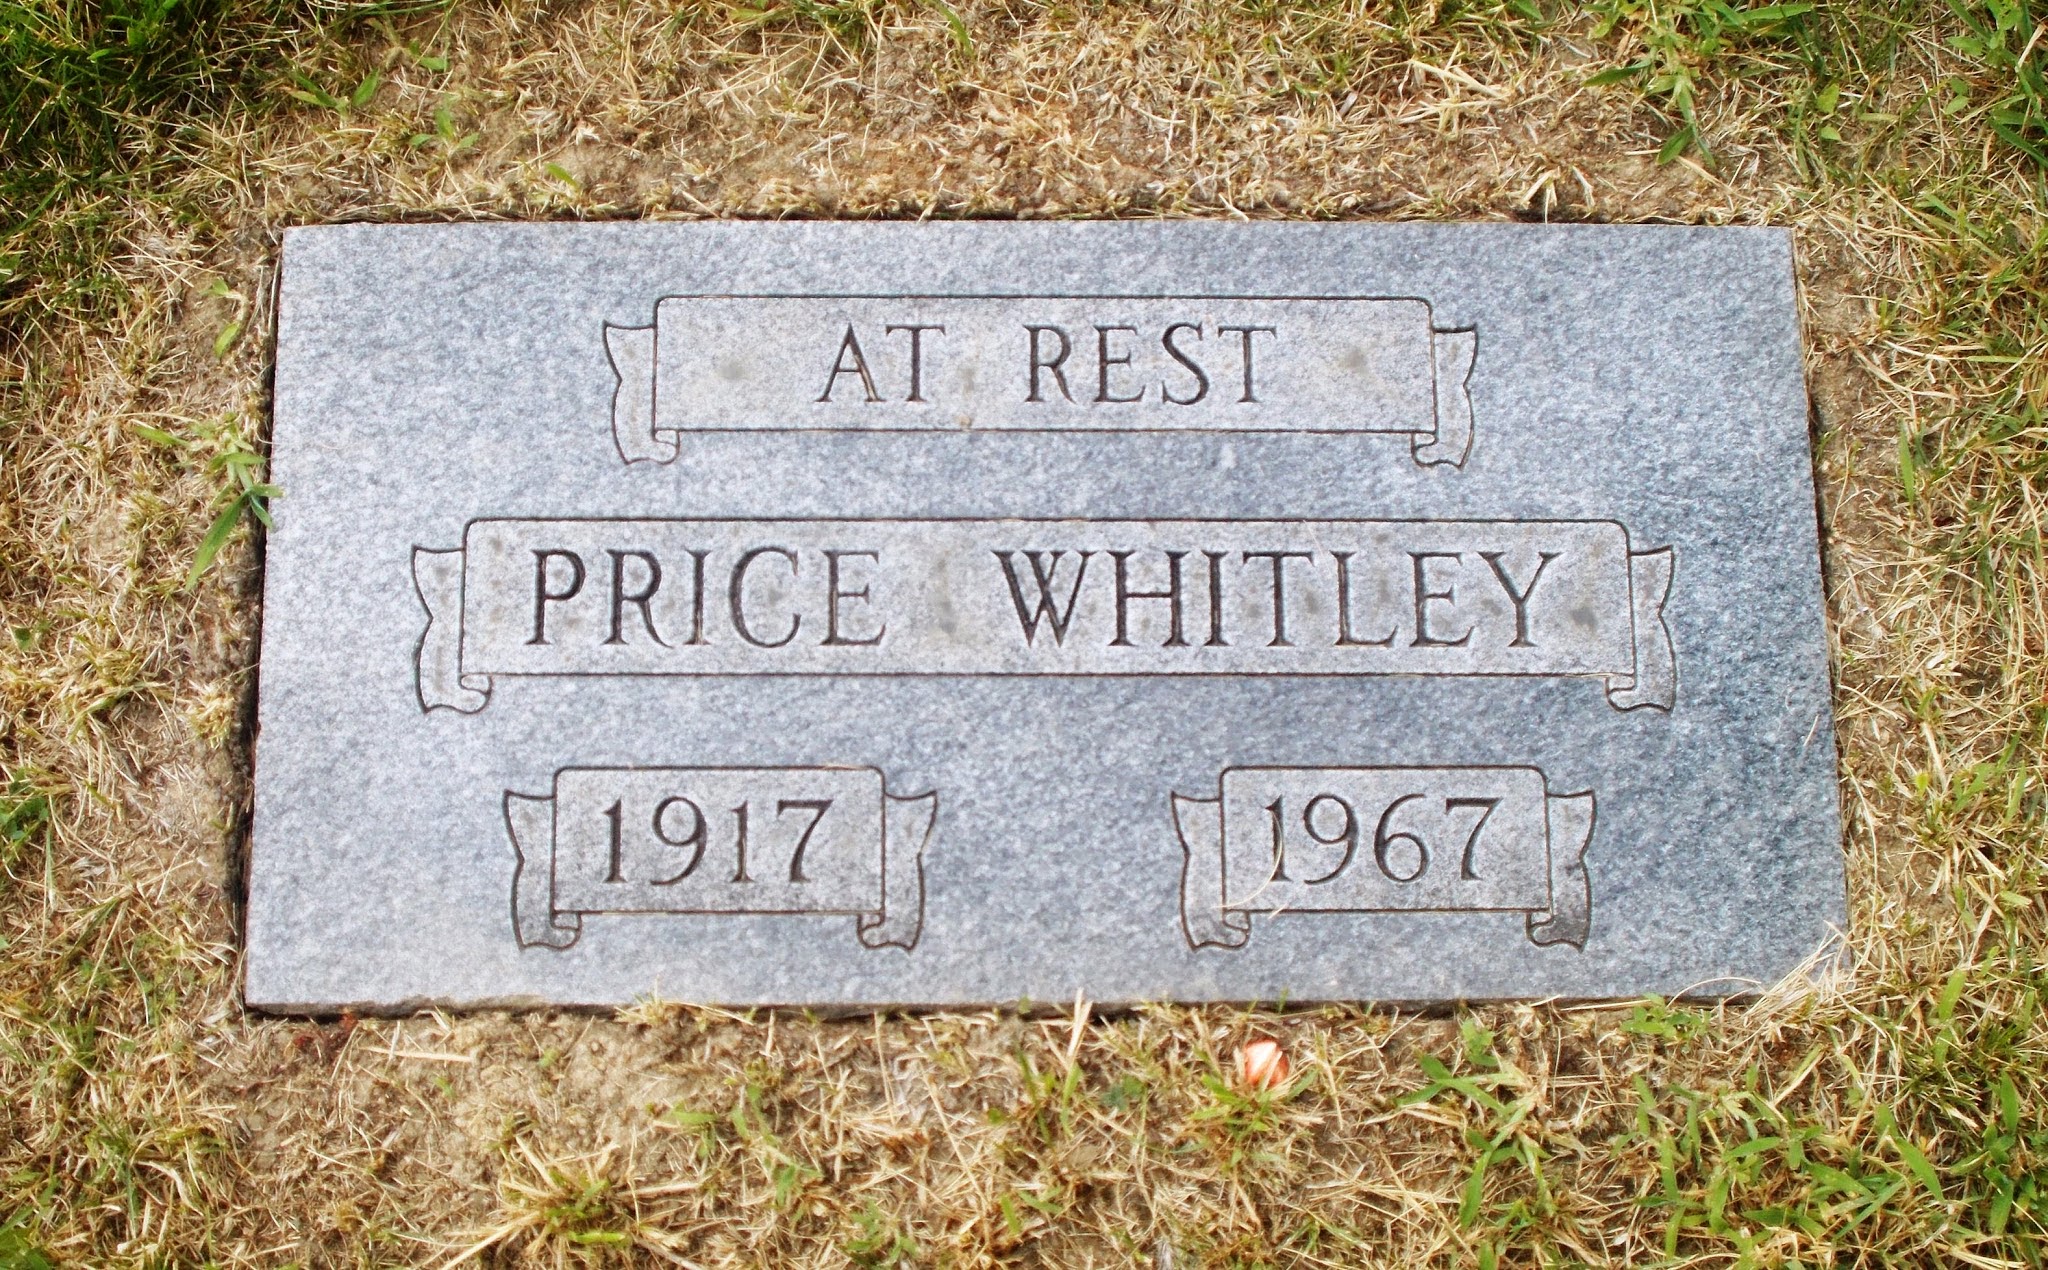 Price Whitley